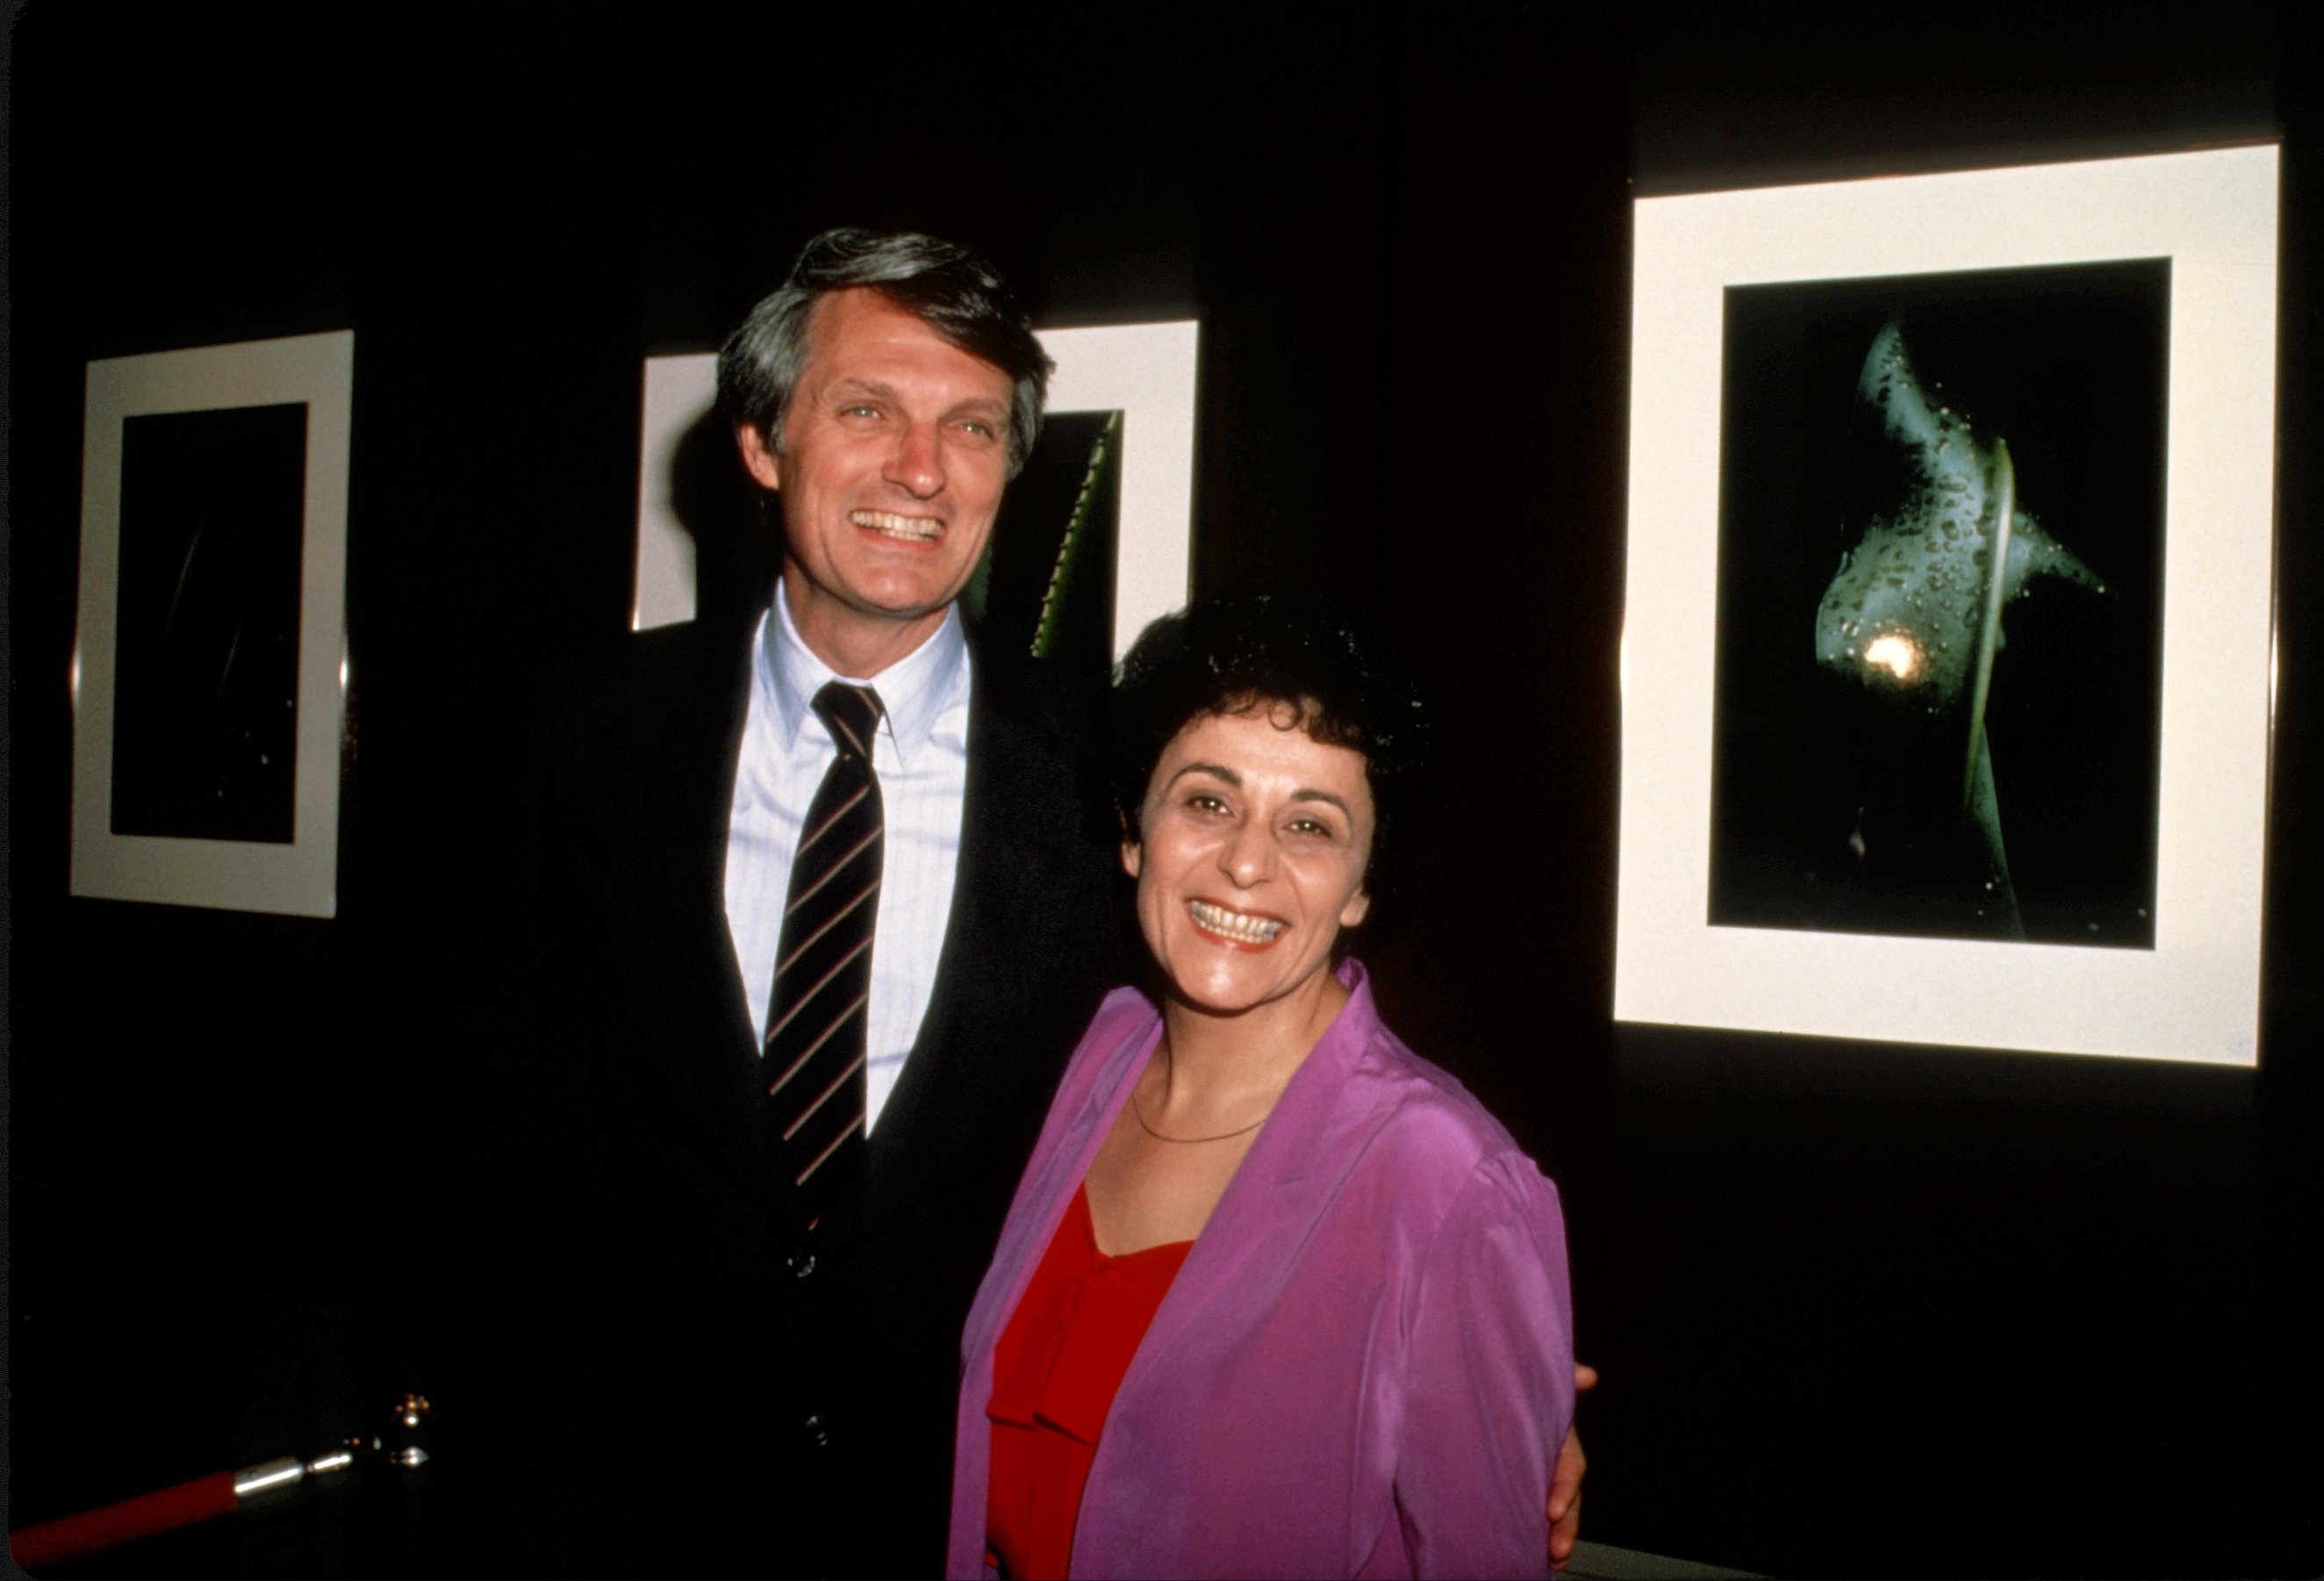 Actor Alan Alda and his wife musician Arlene Alda photographed in 1981 in New York | Source: Getty Images